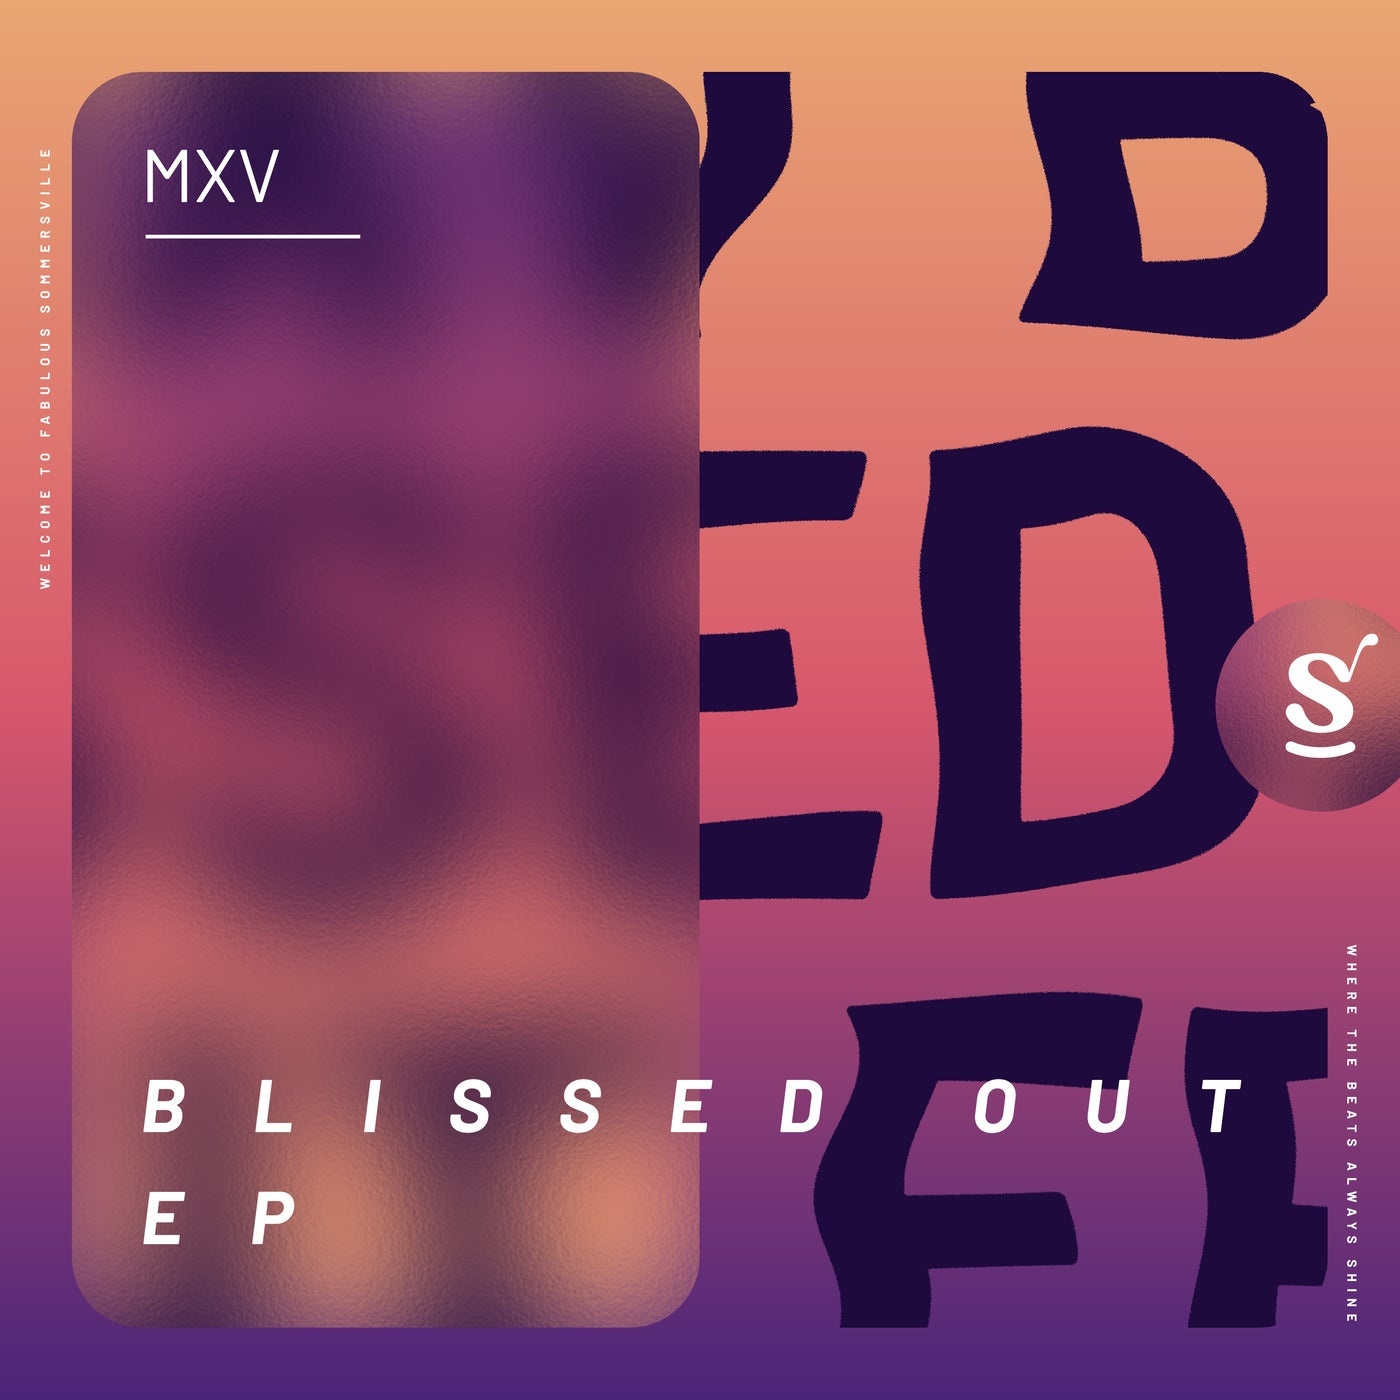 MXV - Blissed Out EP [SVR002]